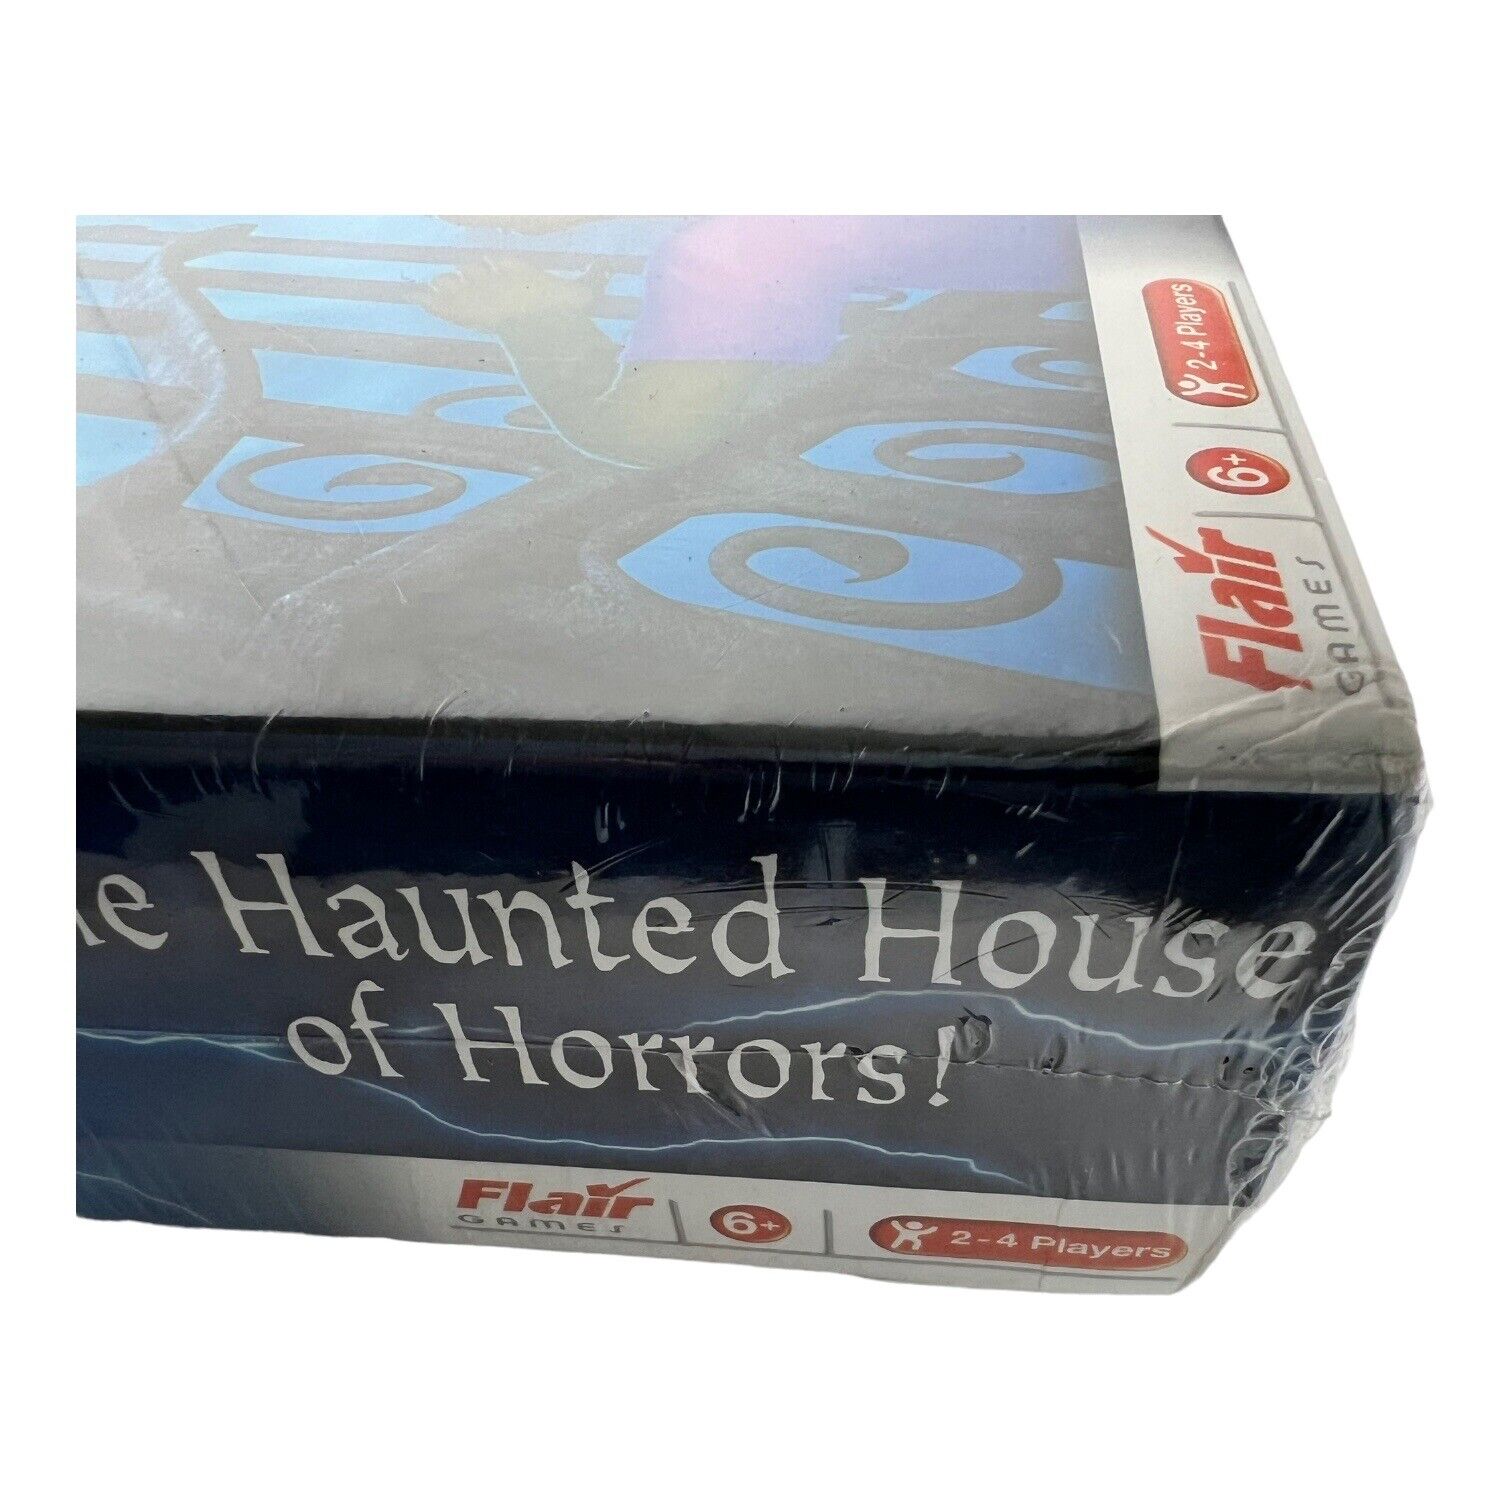 GHOST CASTLE The HAUNTED HOUSE of HORRORS NEW Factory SEALED BOARD GAME Flair ! Flaire Leisure Products Items # 36000 - фотография #19